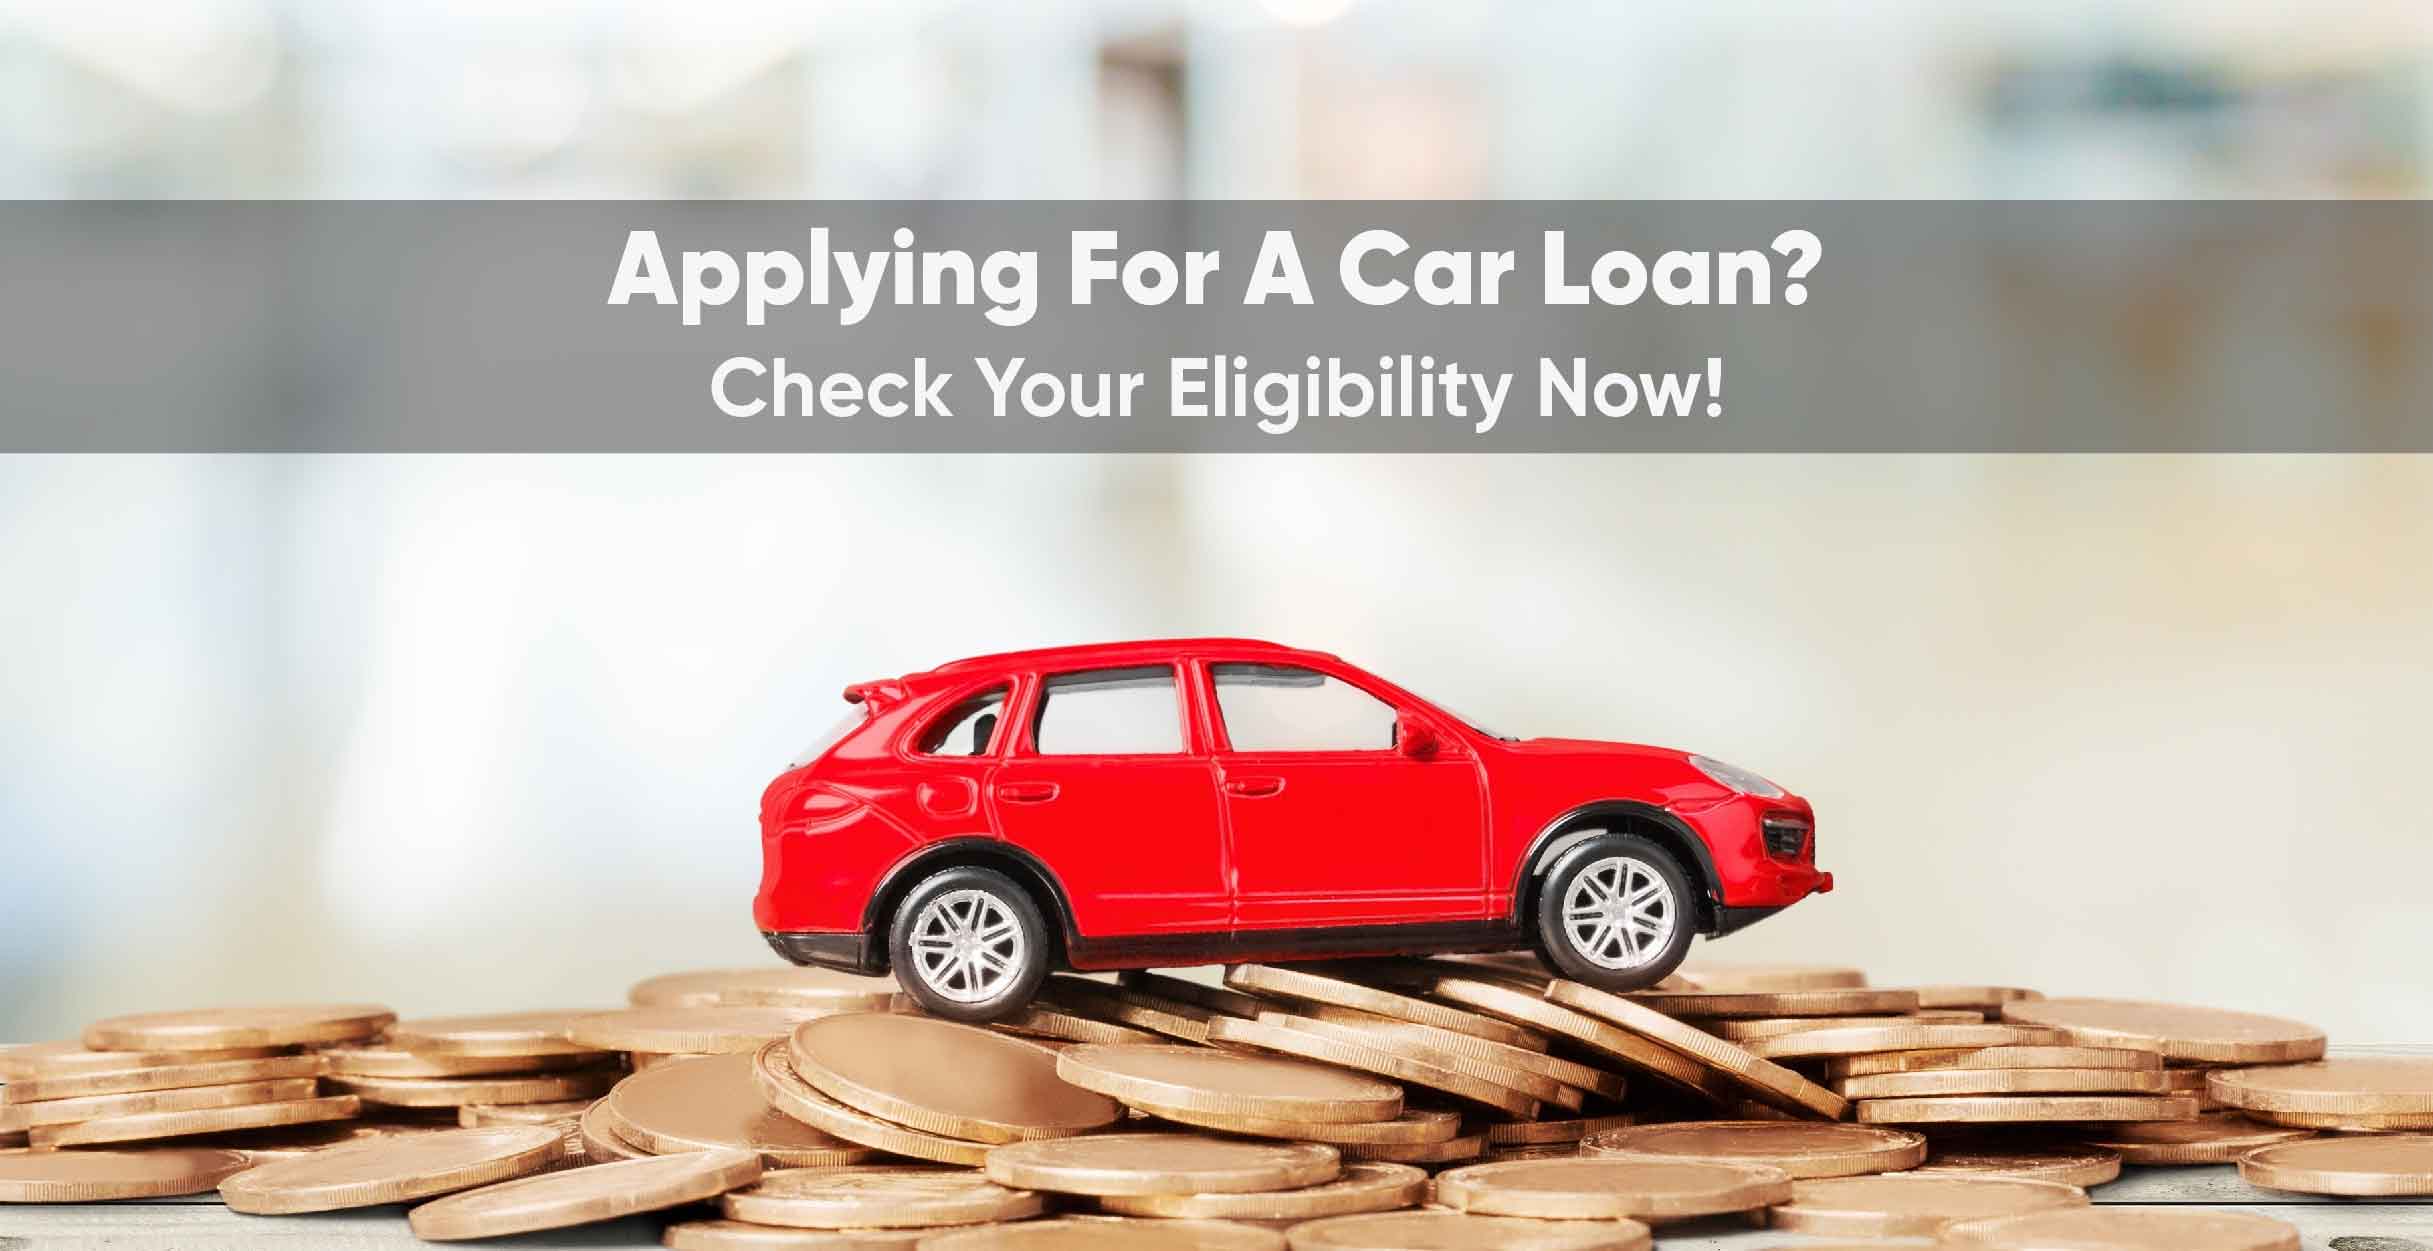 How to apply for car loan